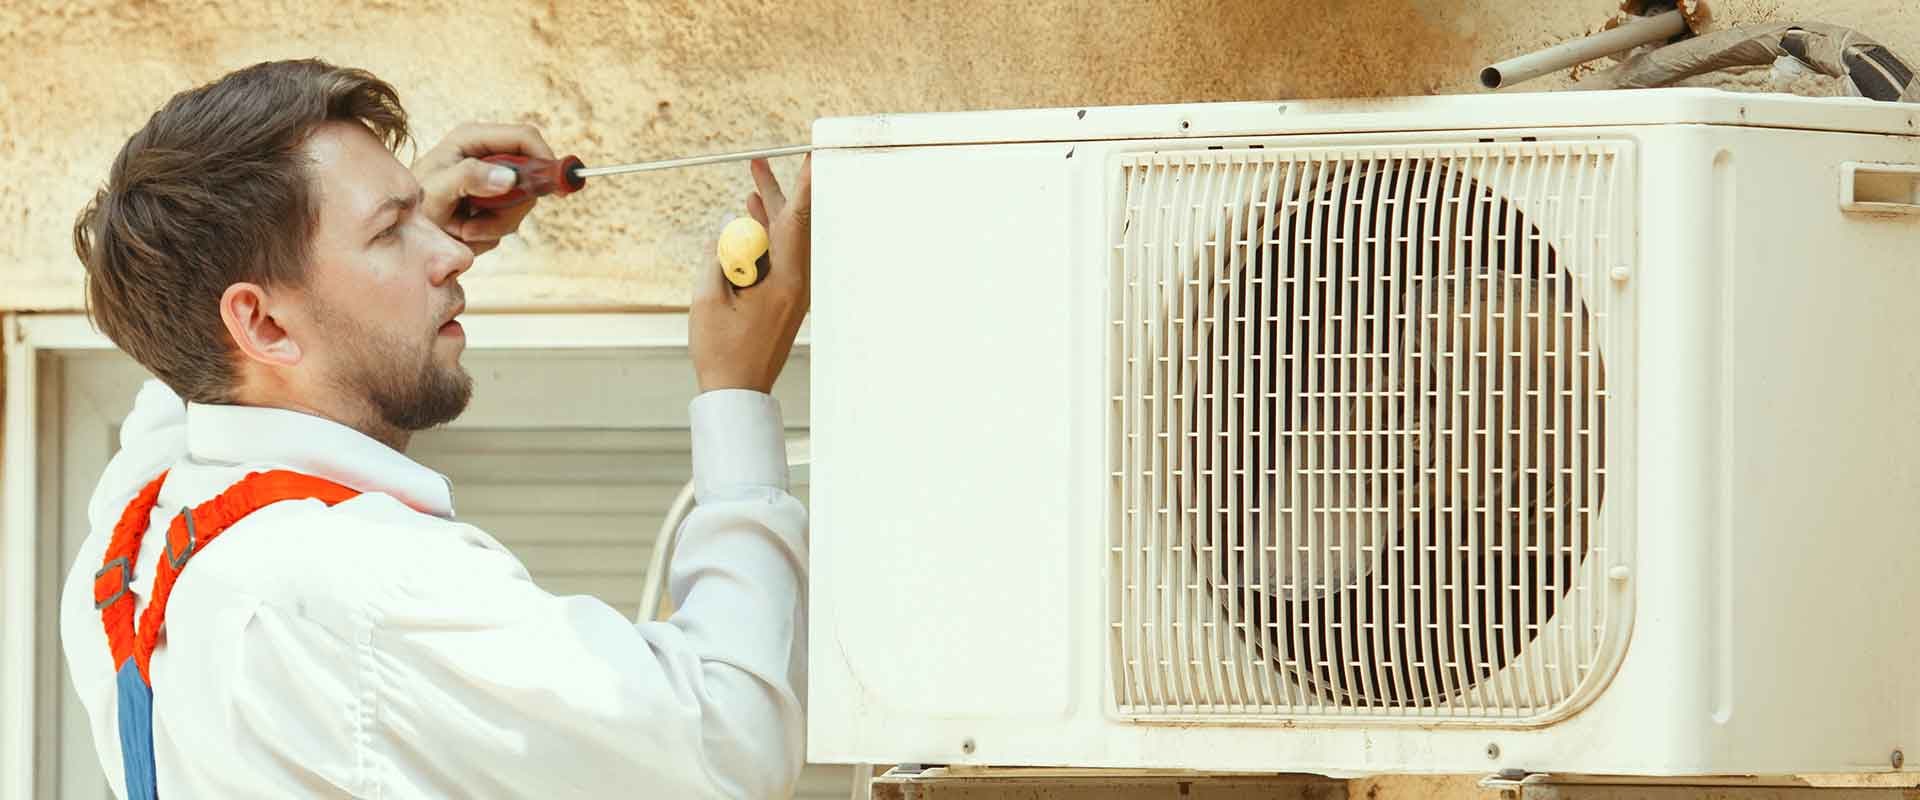 Stay Chilled With Annual HVAC Maintenance Plans in Royal Palm Beach FL